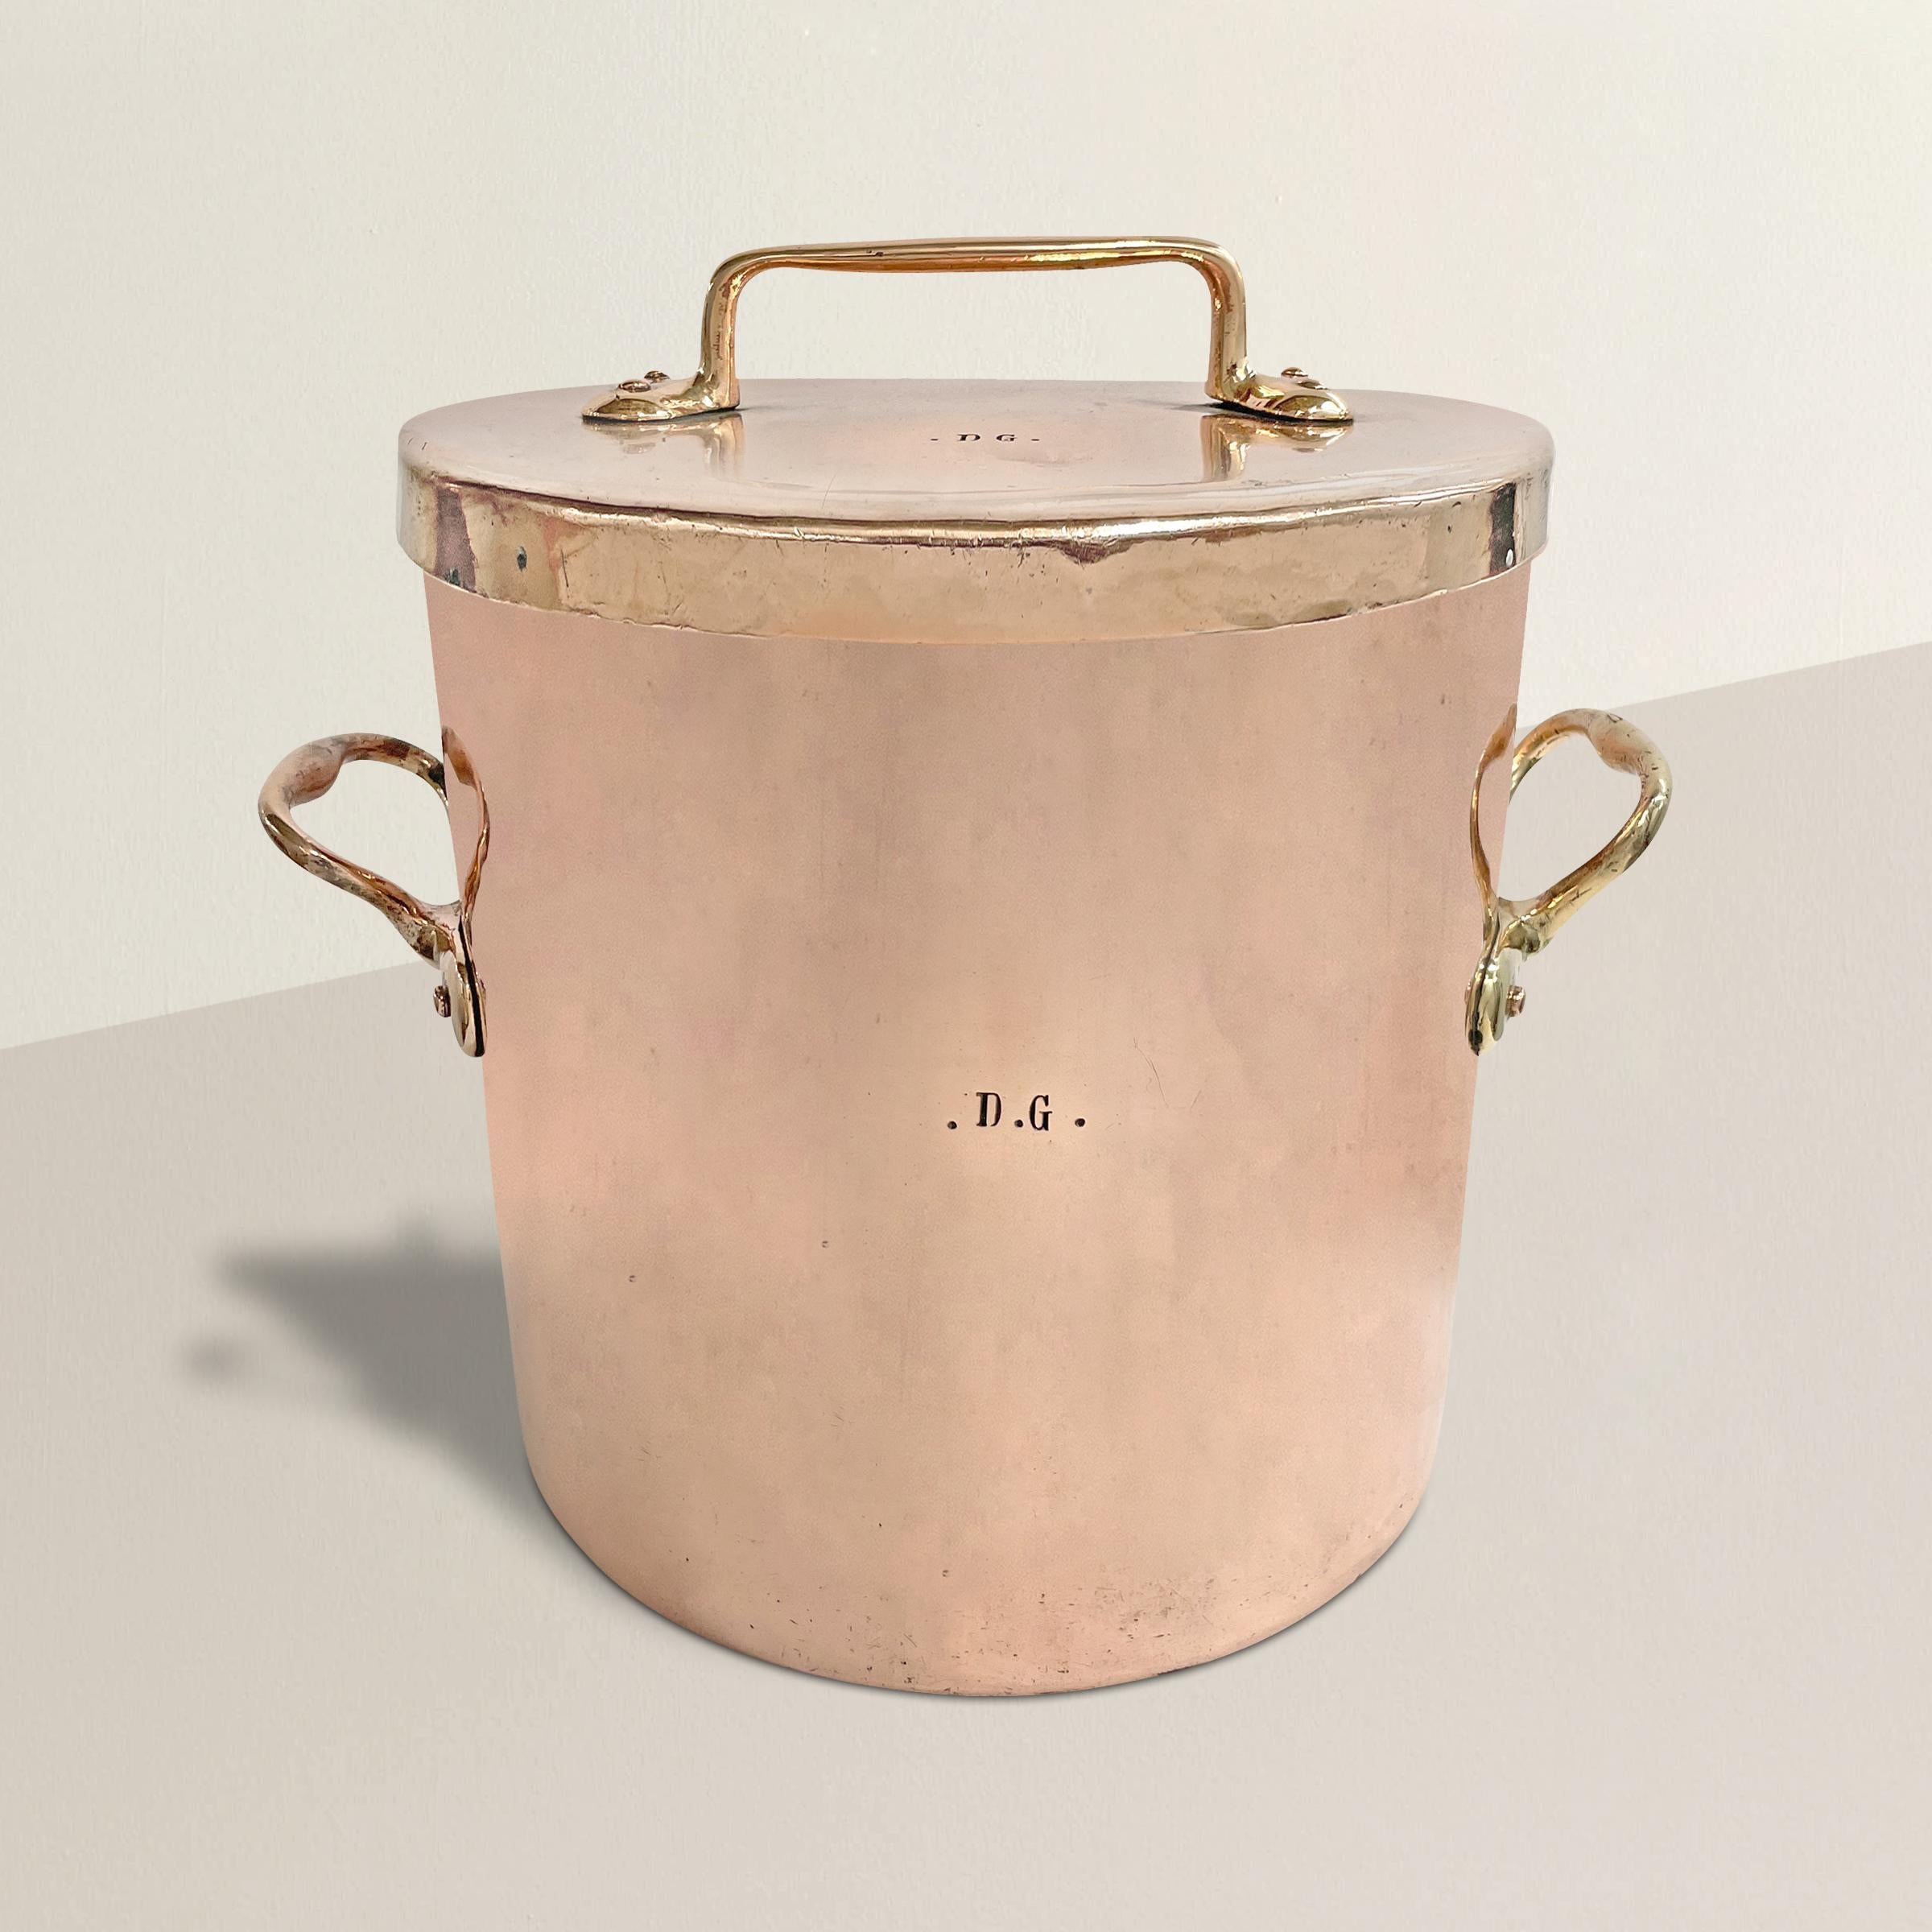 A fantastic large 19th century French copper stock pot that holds 21 quarts of liquid, dovetailed joints running the length of one side, and with a tight fitting lid that fits over the rim which allows the pot to be used as a roaster was well.